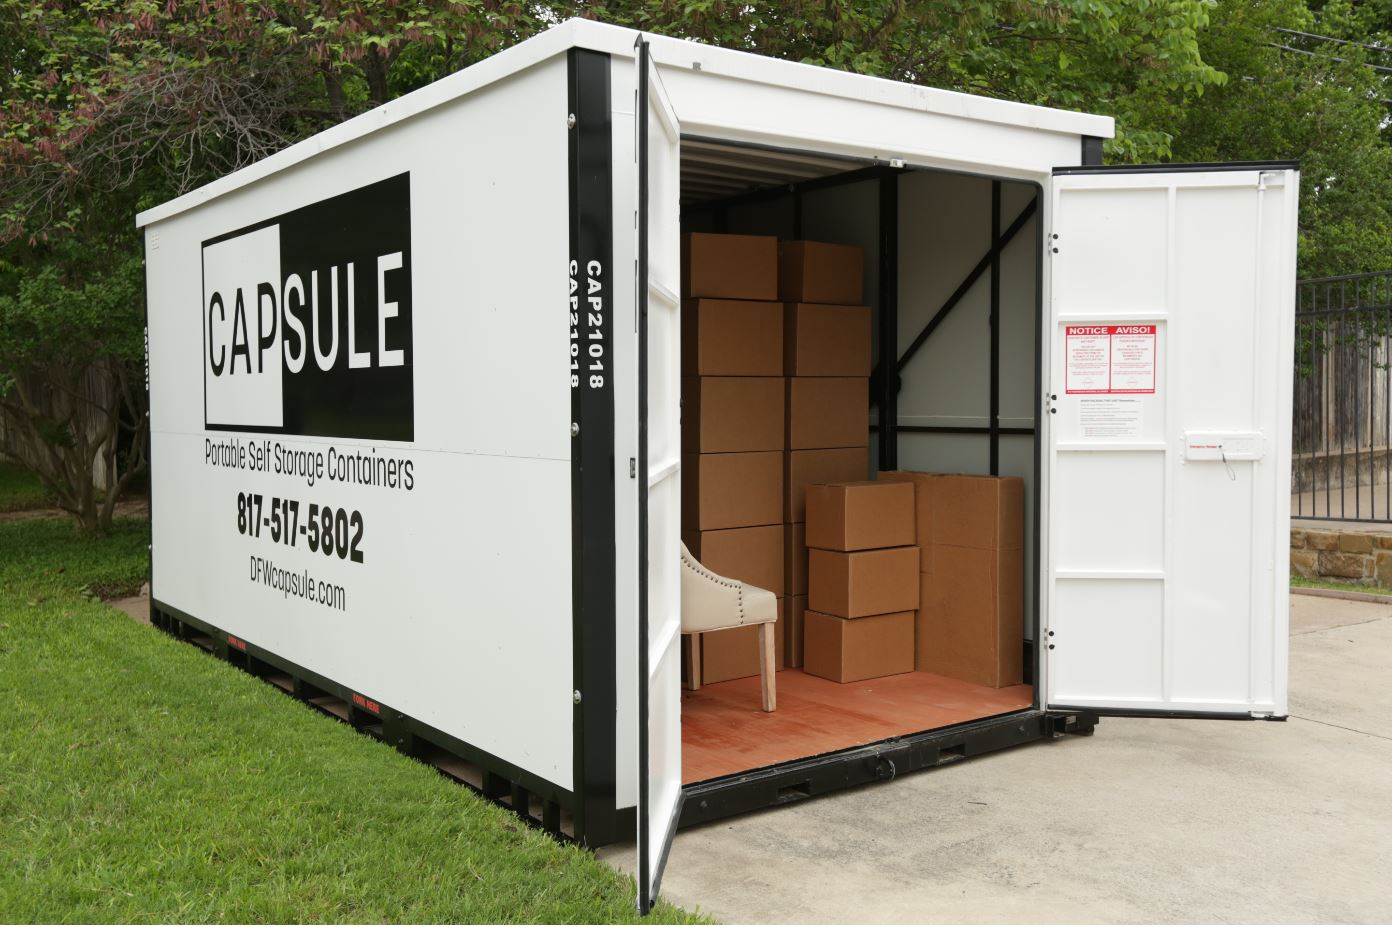 https://www.dfwcapsule.com/wp-content/uploads/2022/05/Southlake-Moving-and-storage-pods-container-alternative-Capsule-Dallas-fort-worth-Lewisville.jpg